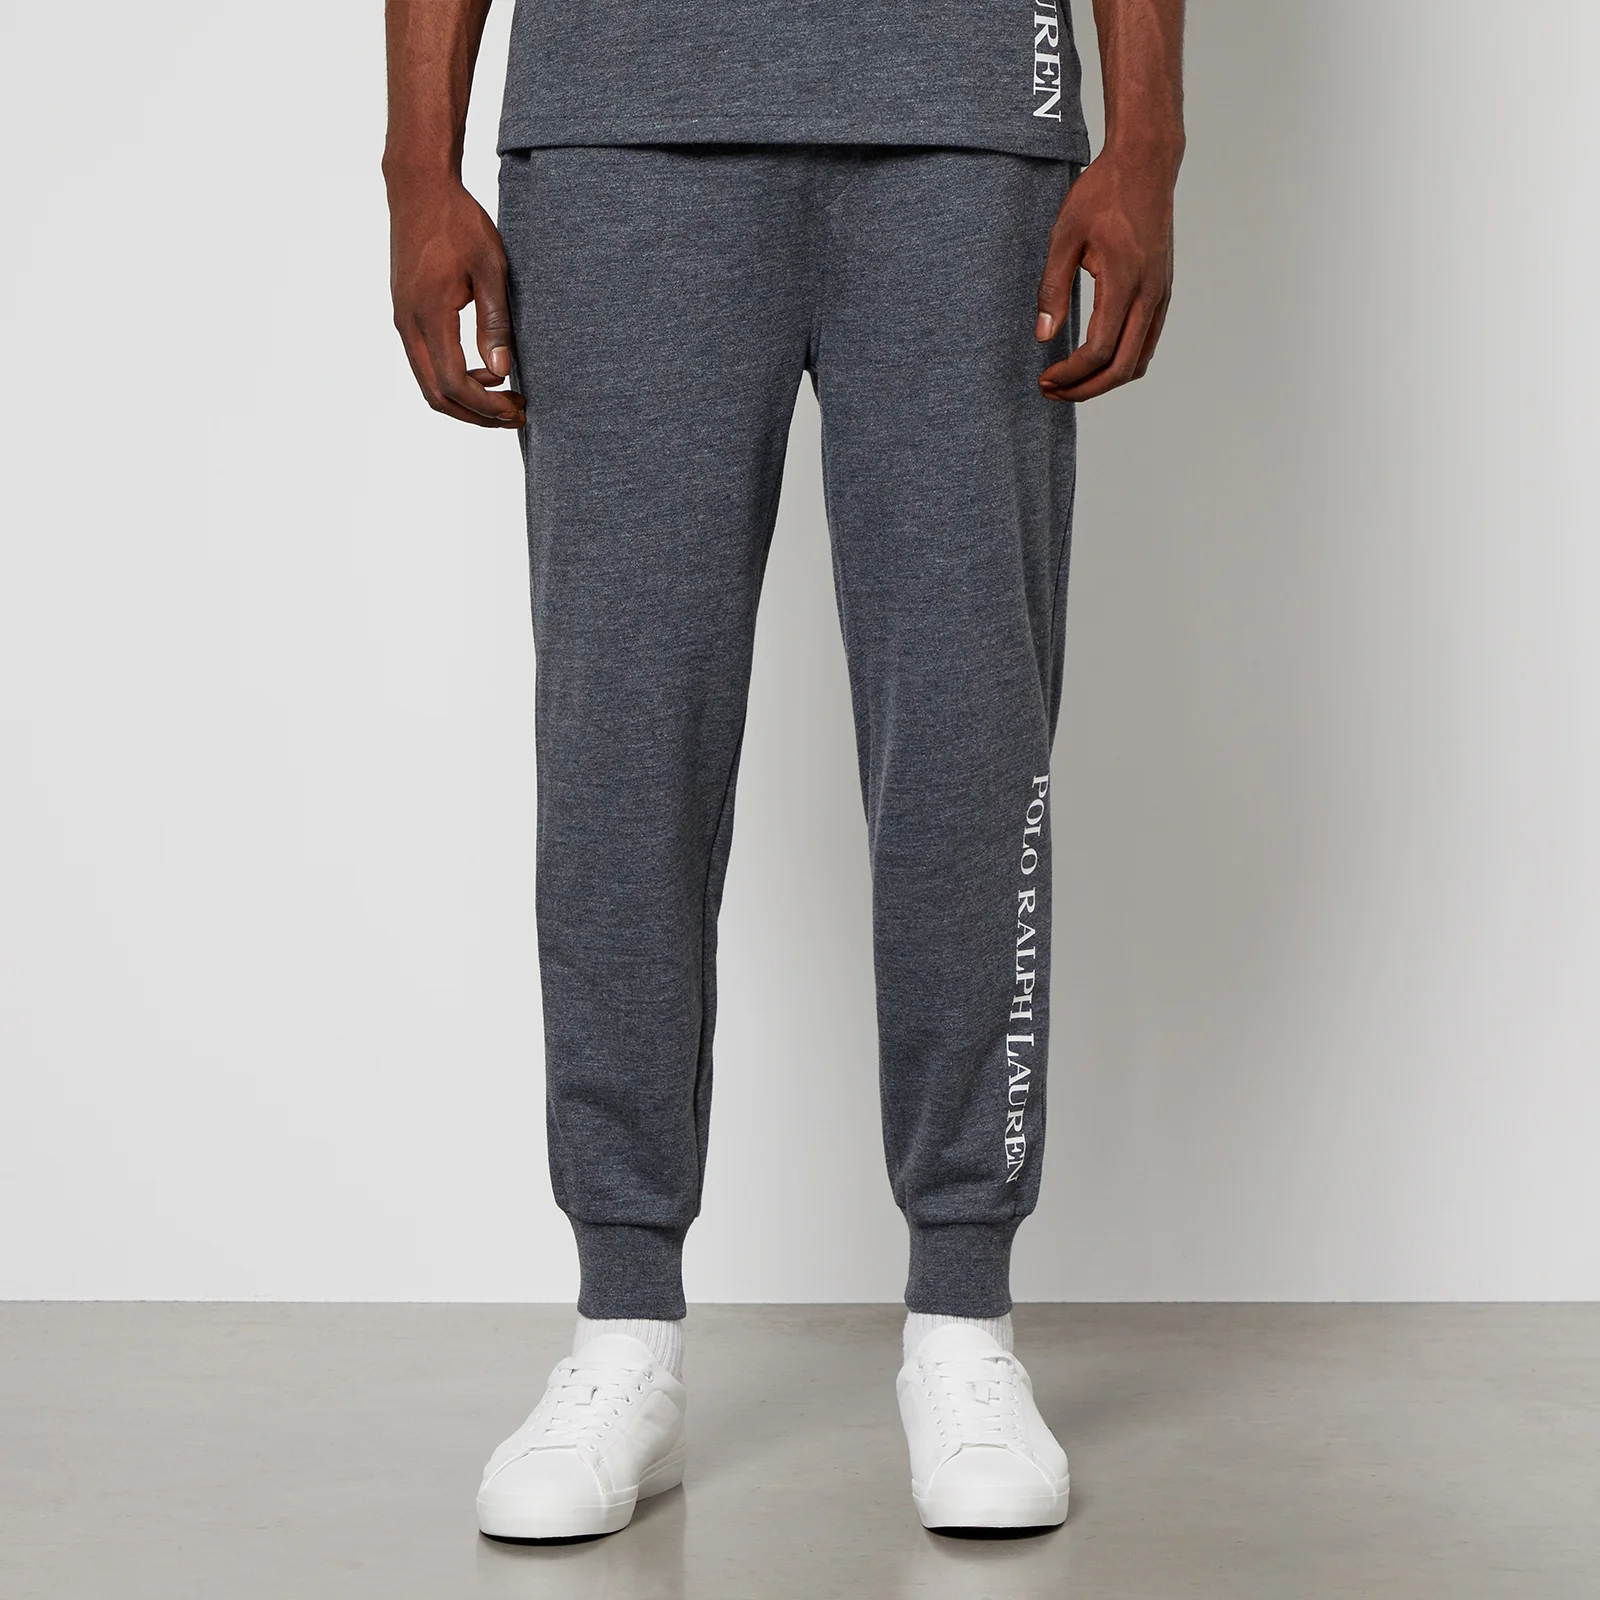 Polo Ralph Lauren Men's Loopback Jersey Joggers - Charcoal Heather Image 1